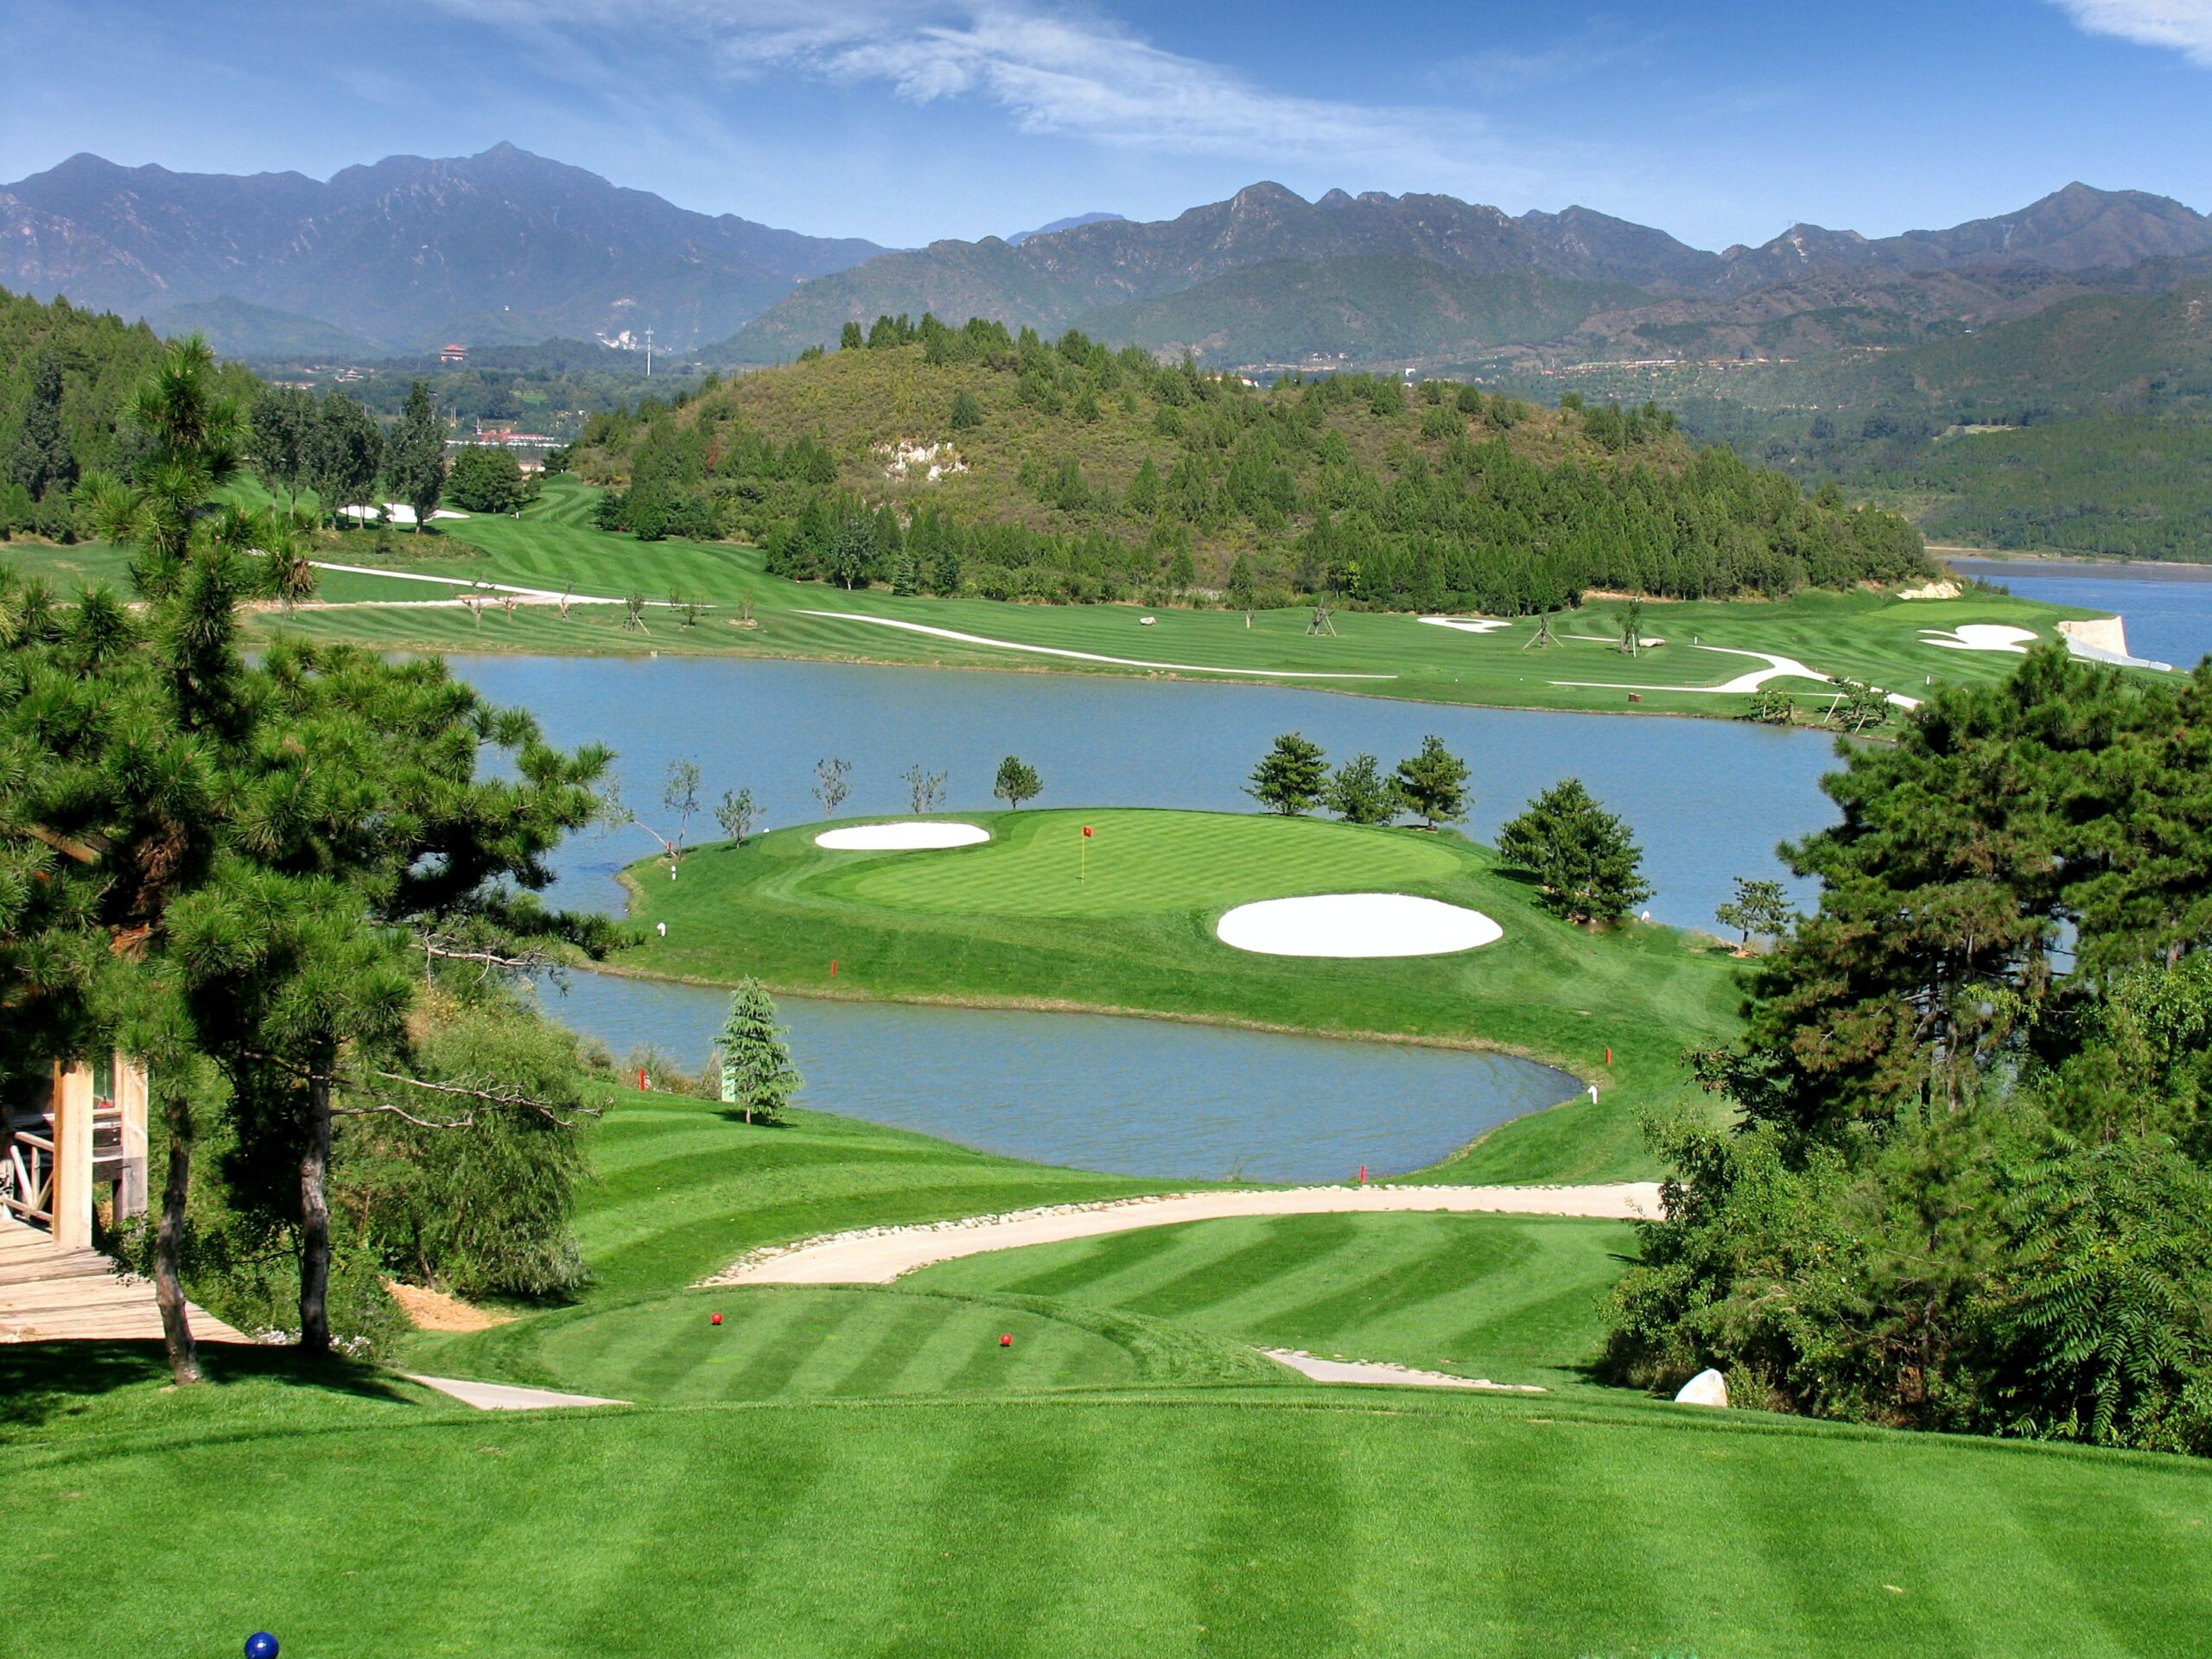 View of a golf green below surrounded with water with a mountain backdrop